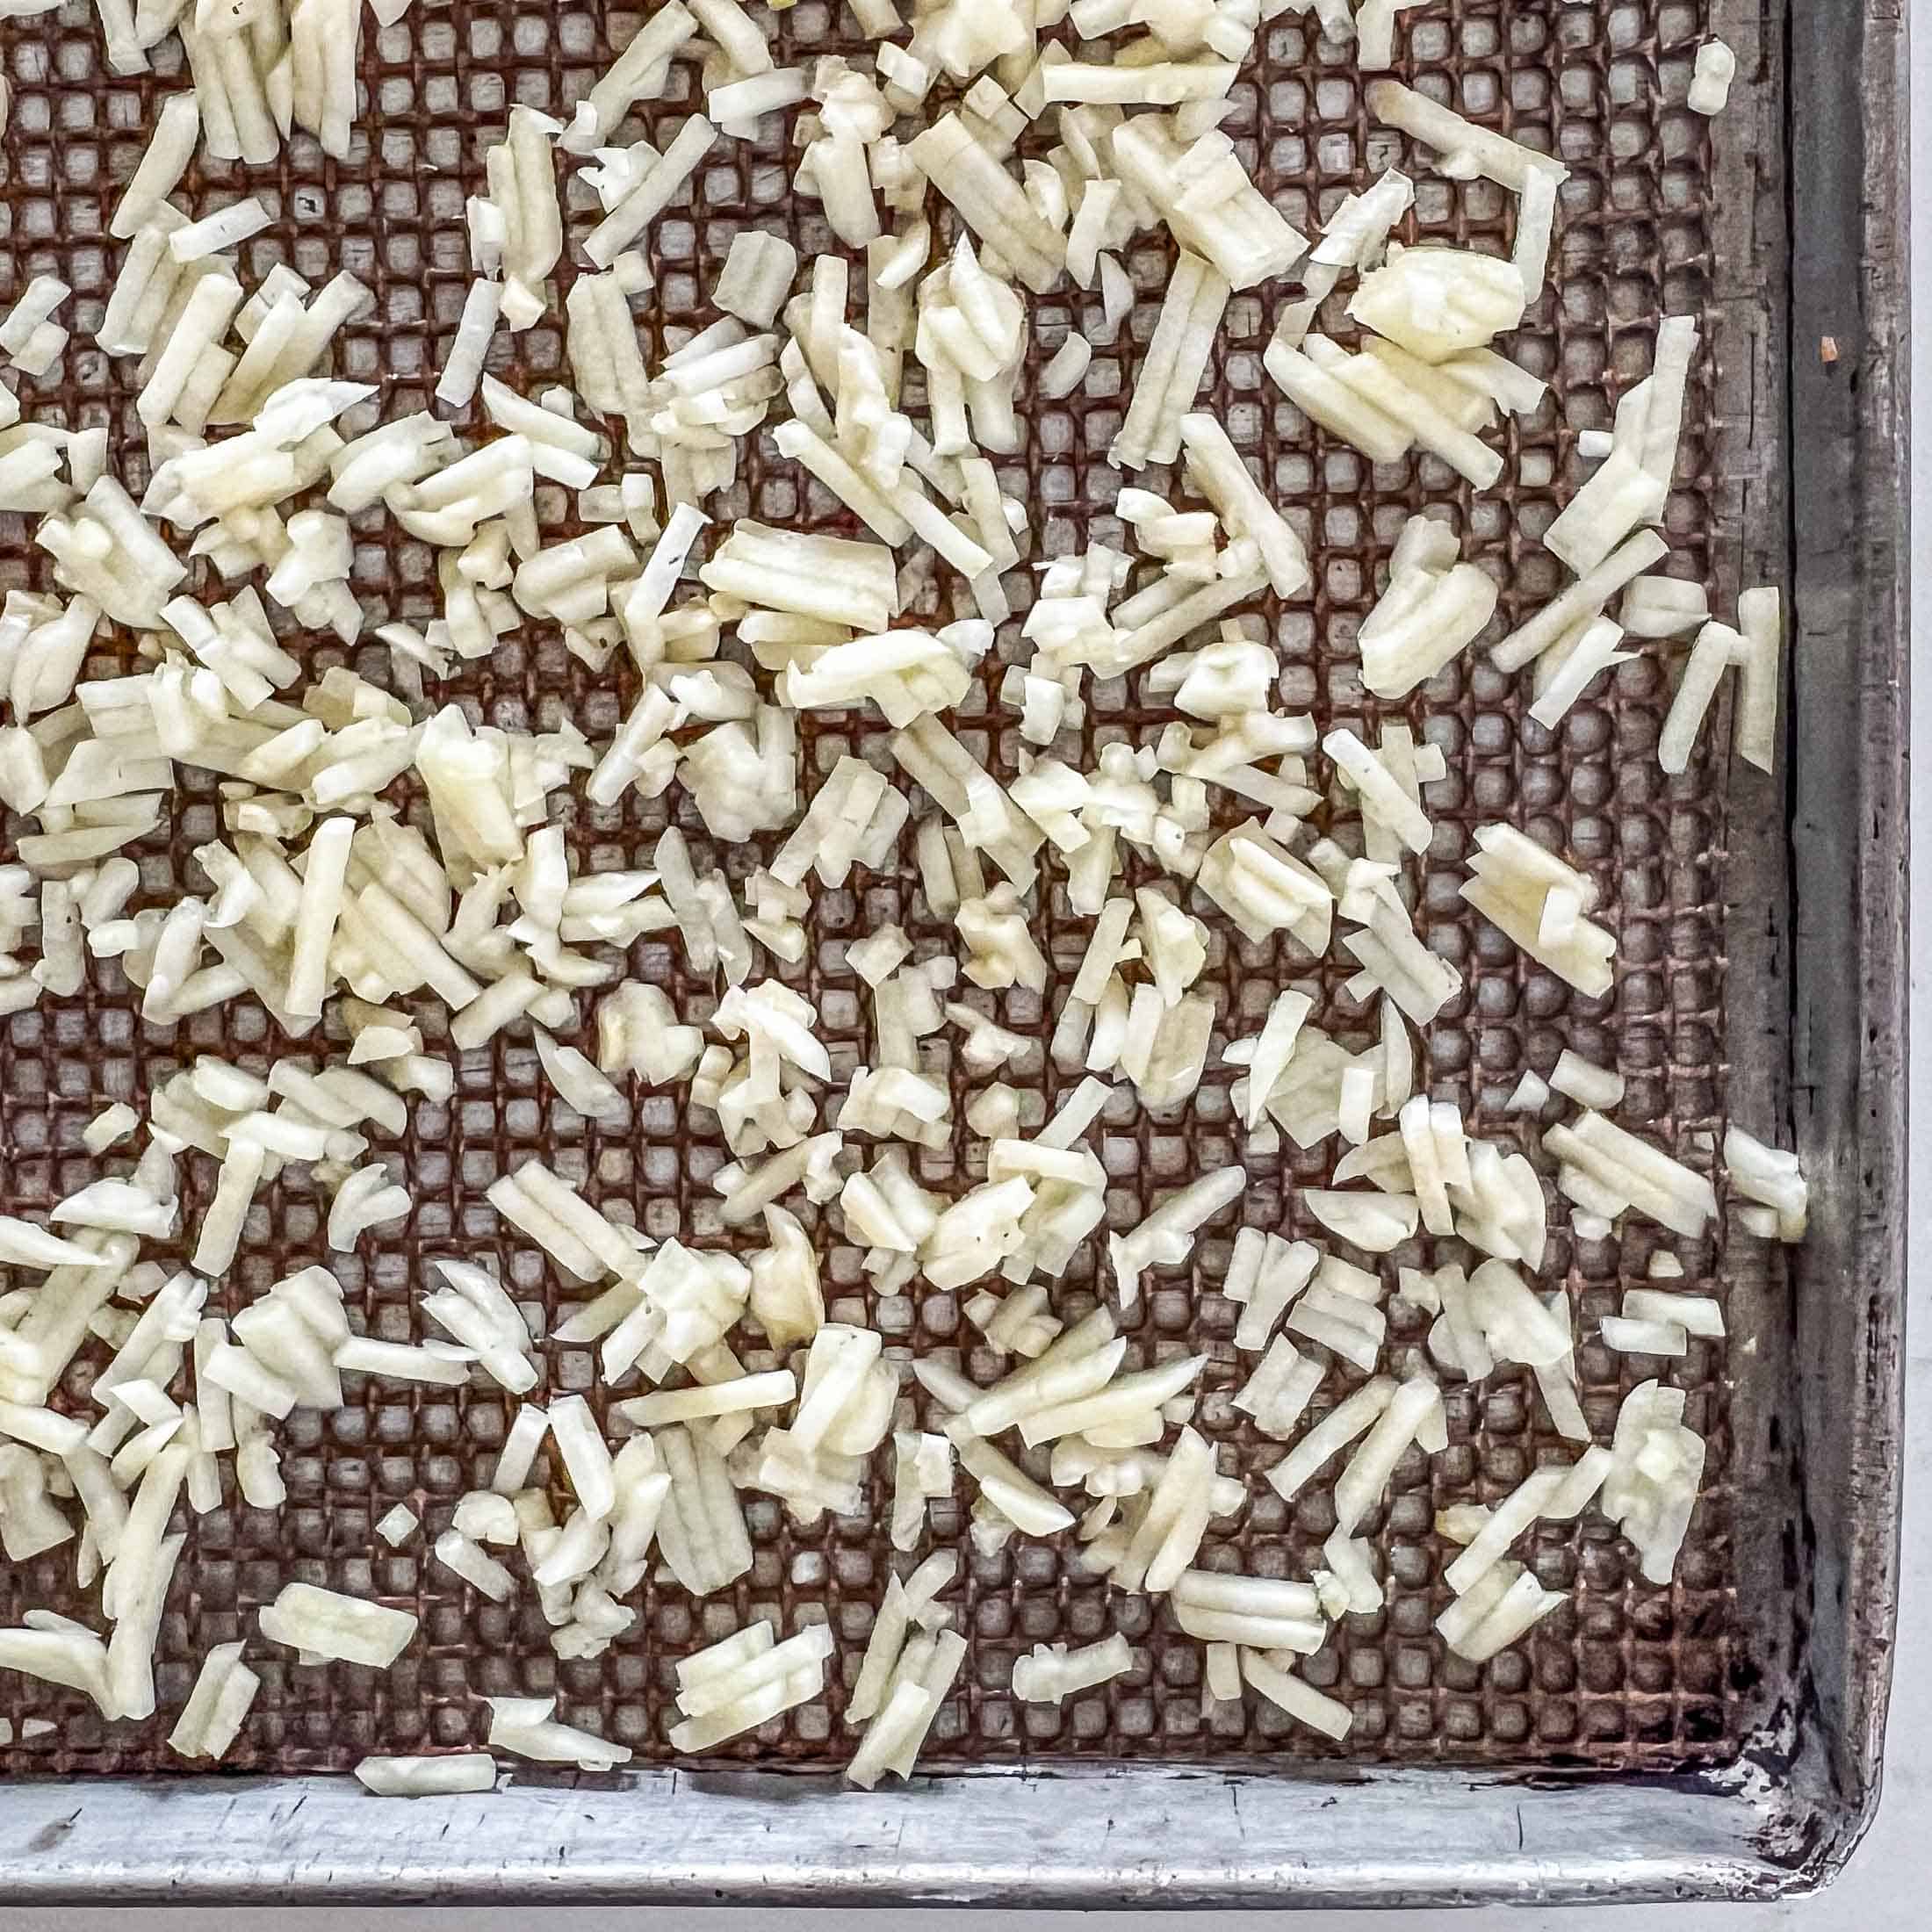 Minced garlic on a baking sheet before drying.